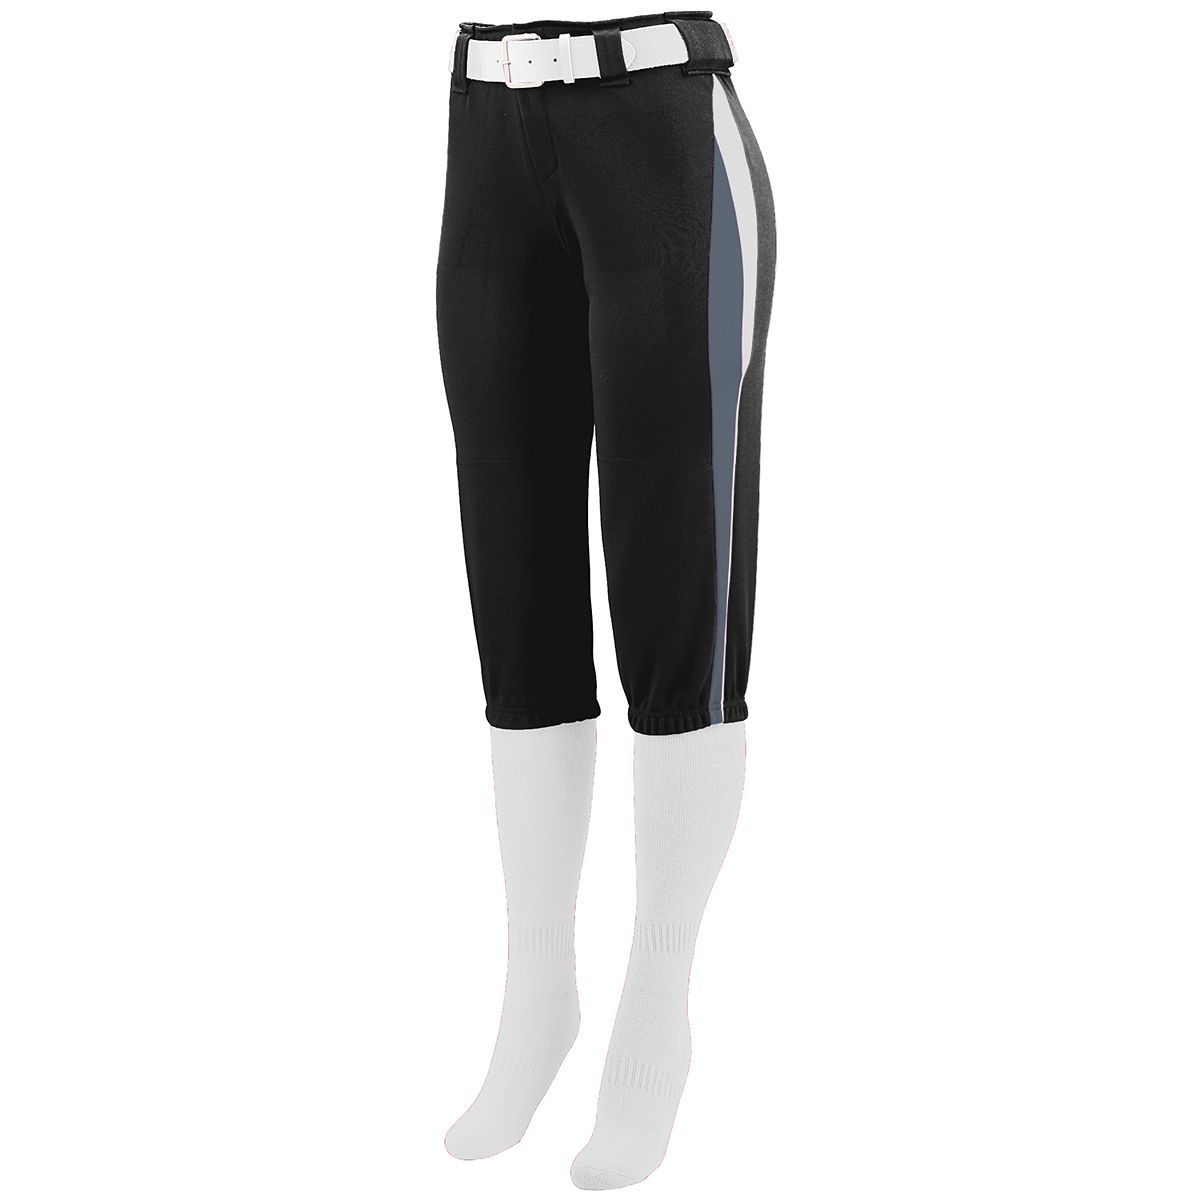 Augusta Sportswear Ladies Comet Pant in Black/Graphite/White  -Part of the Ladies, Ladies-Pants, Pants, Augusta-Products, Softball product lines at KanaleyCreations.com